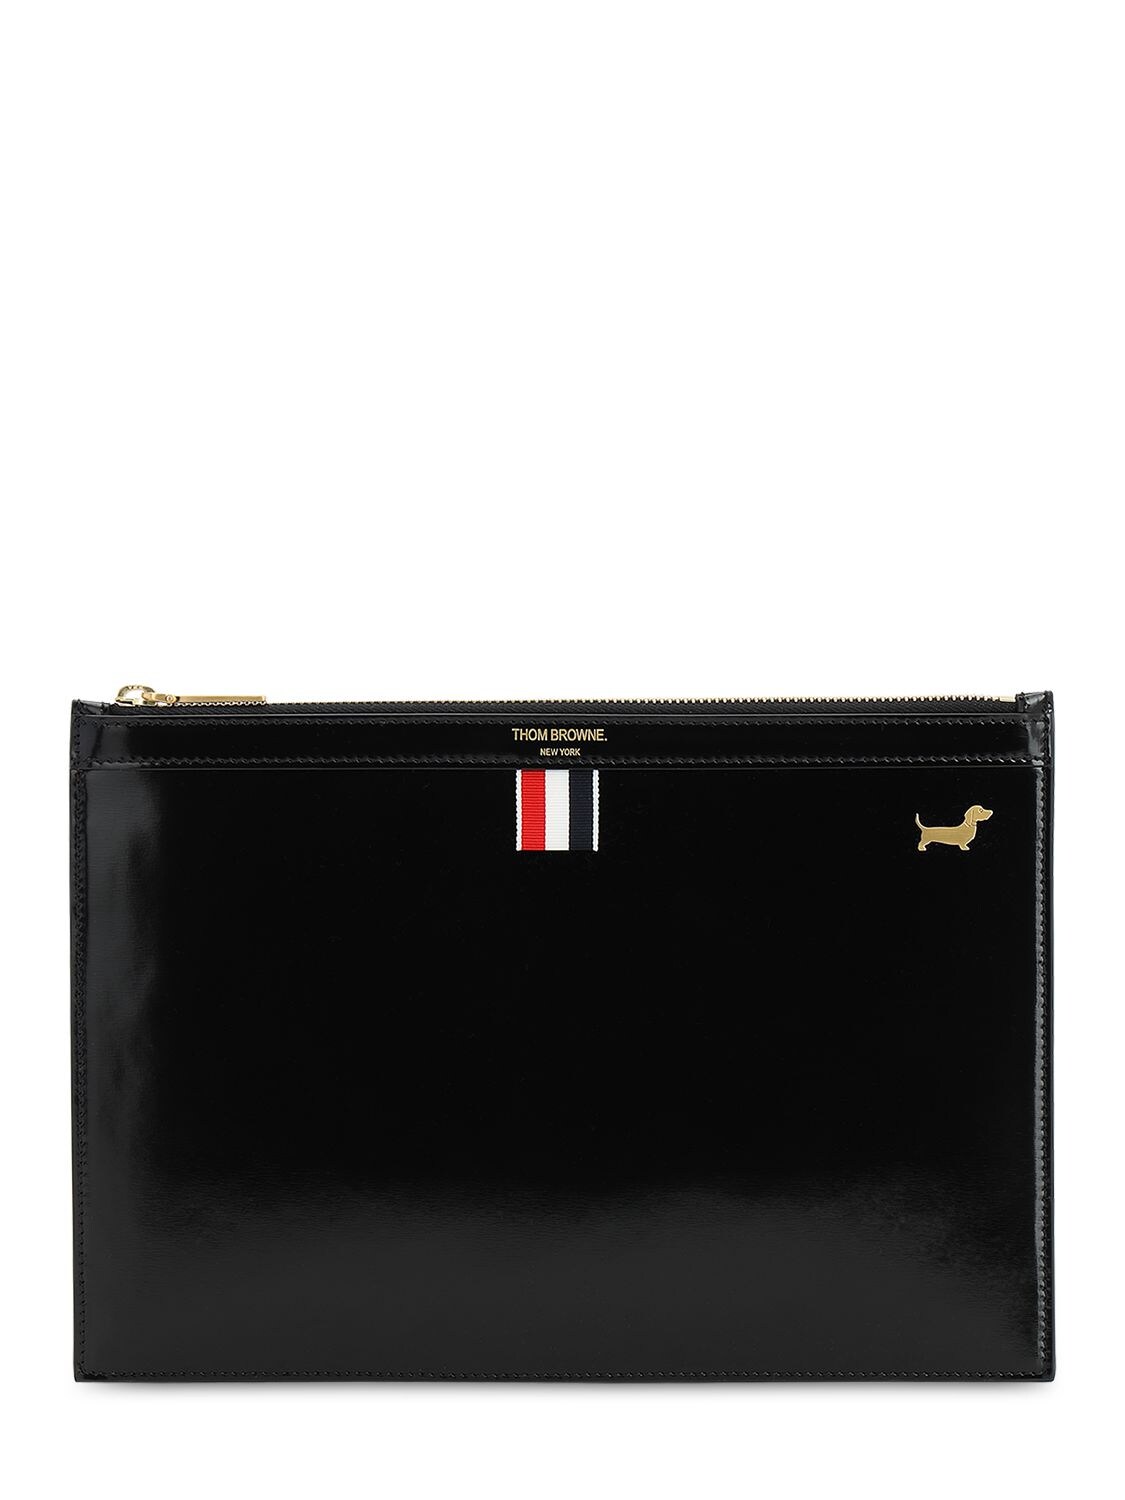 Thom Browne Smooth Leather Pouch In Black